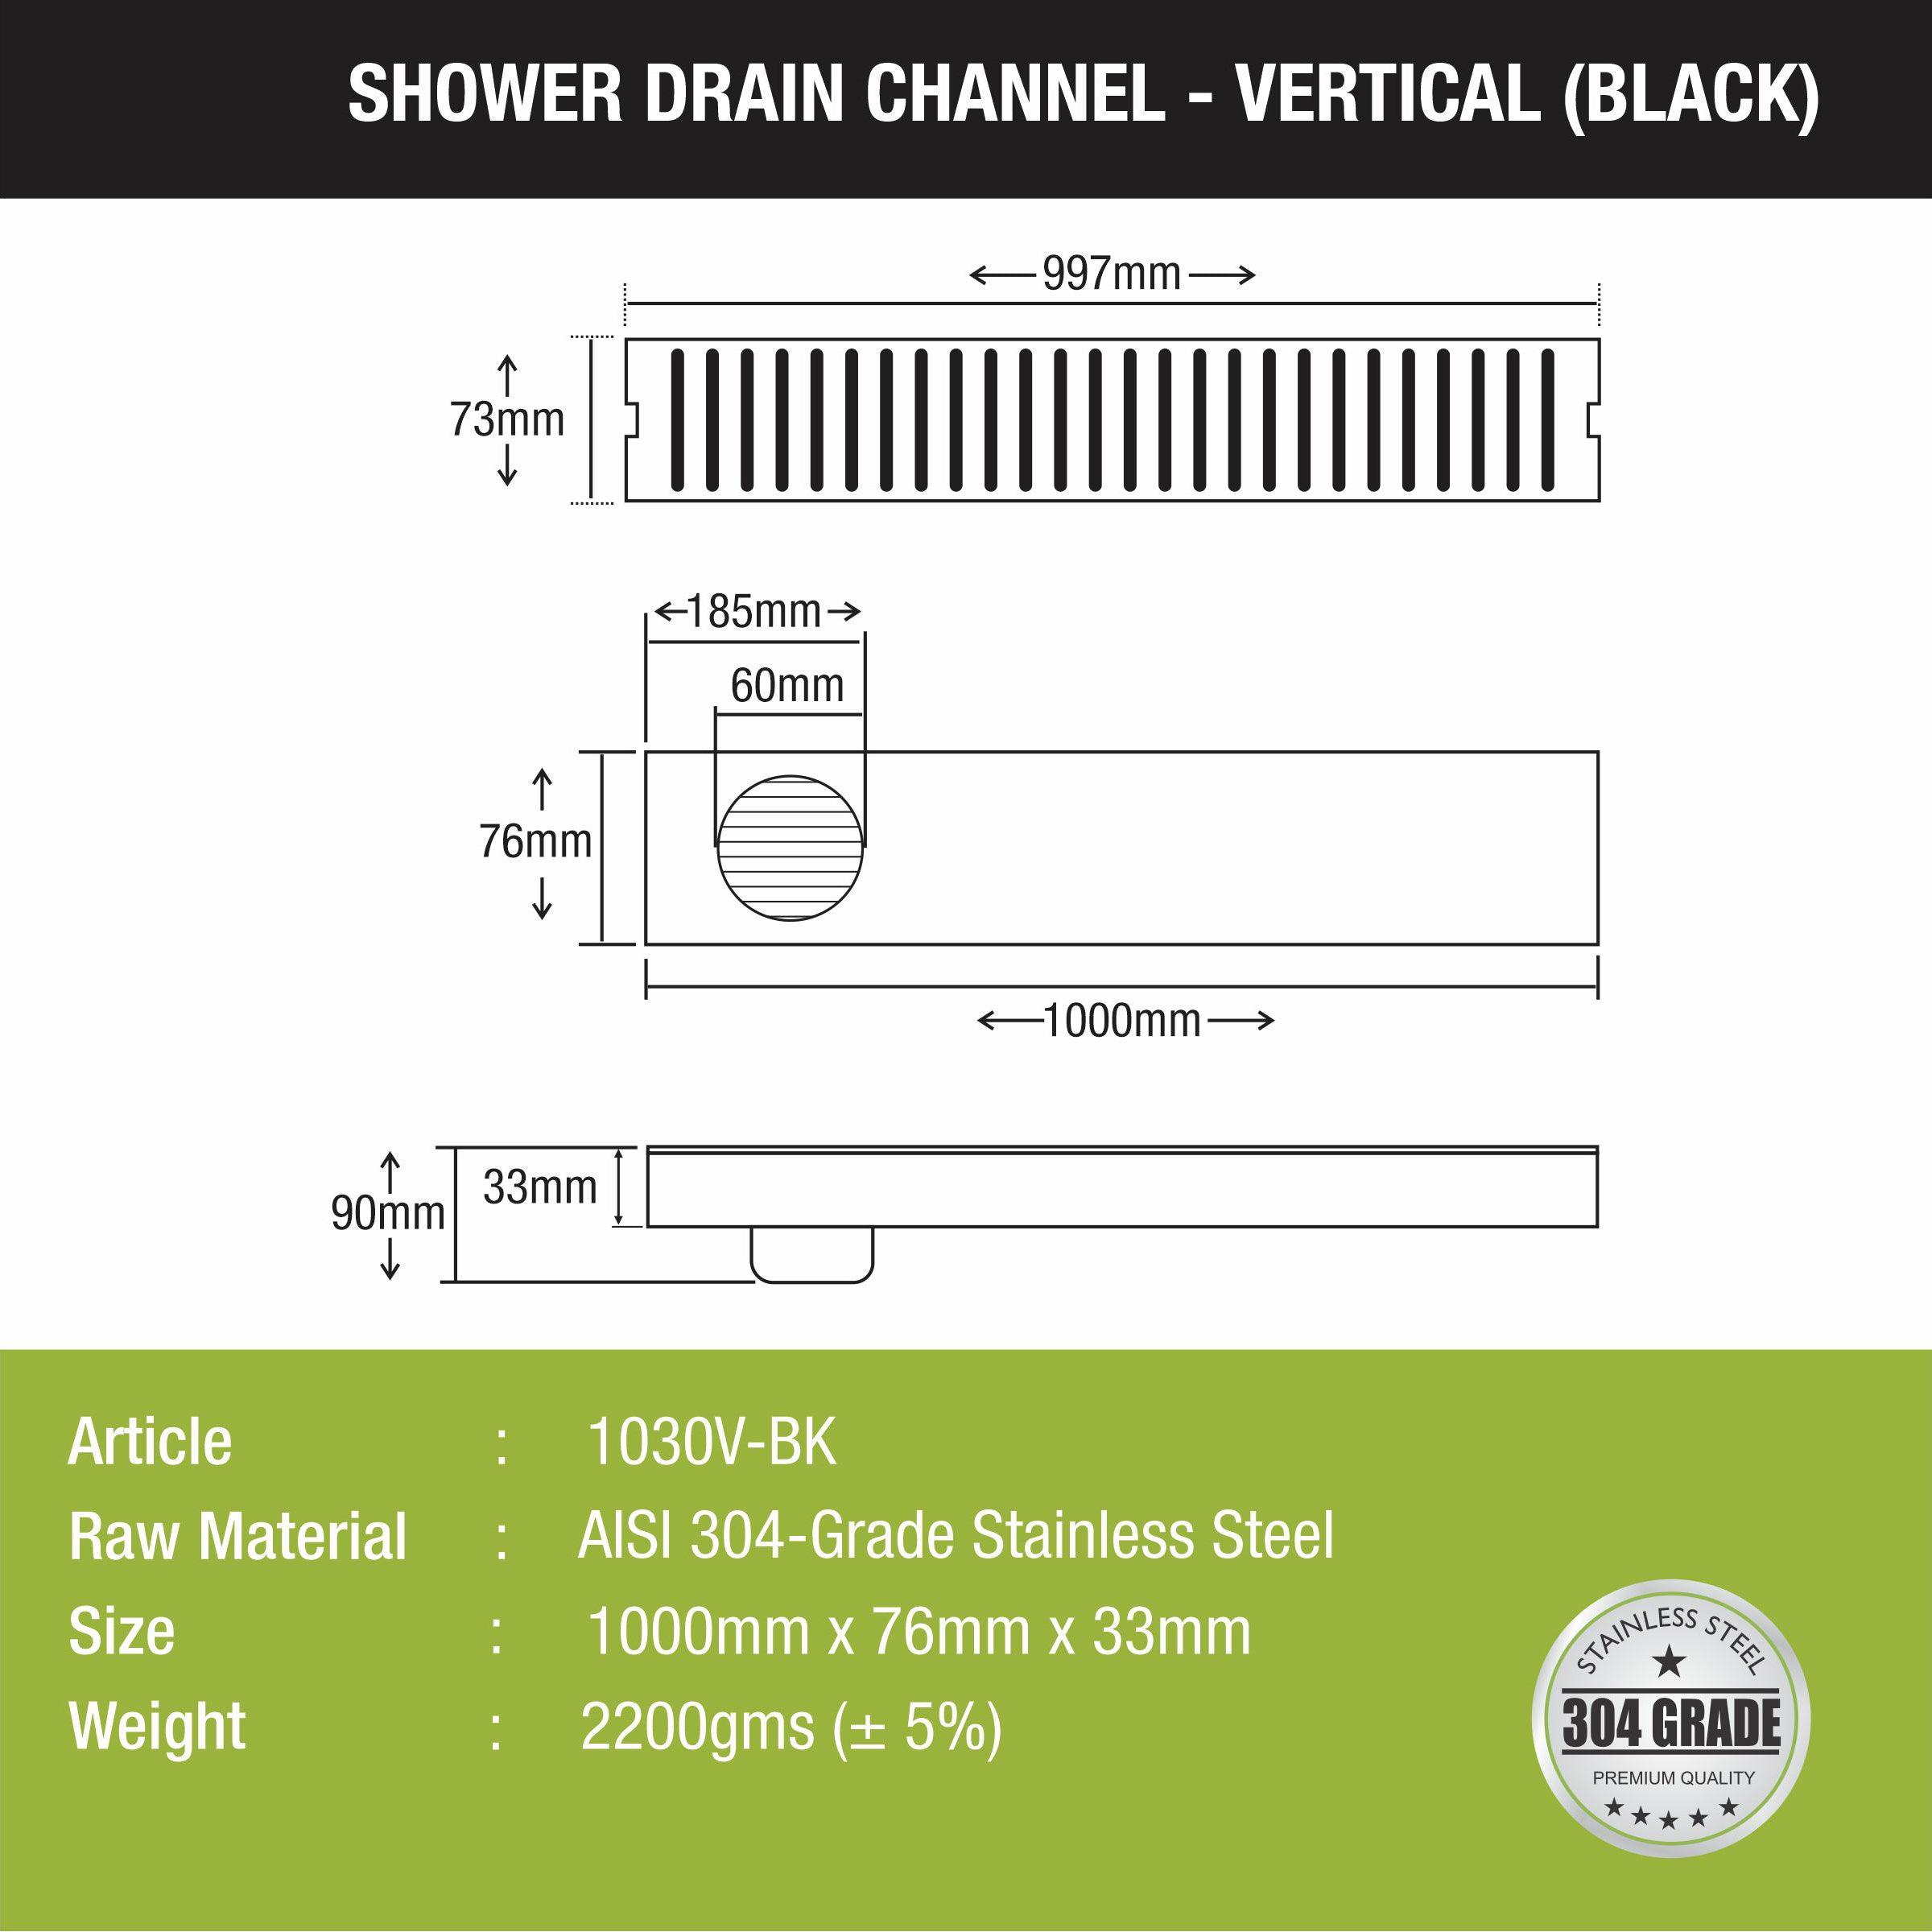 Vertical Shower Drain Channel - Black (40 x 3 Inches) size and measurement